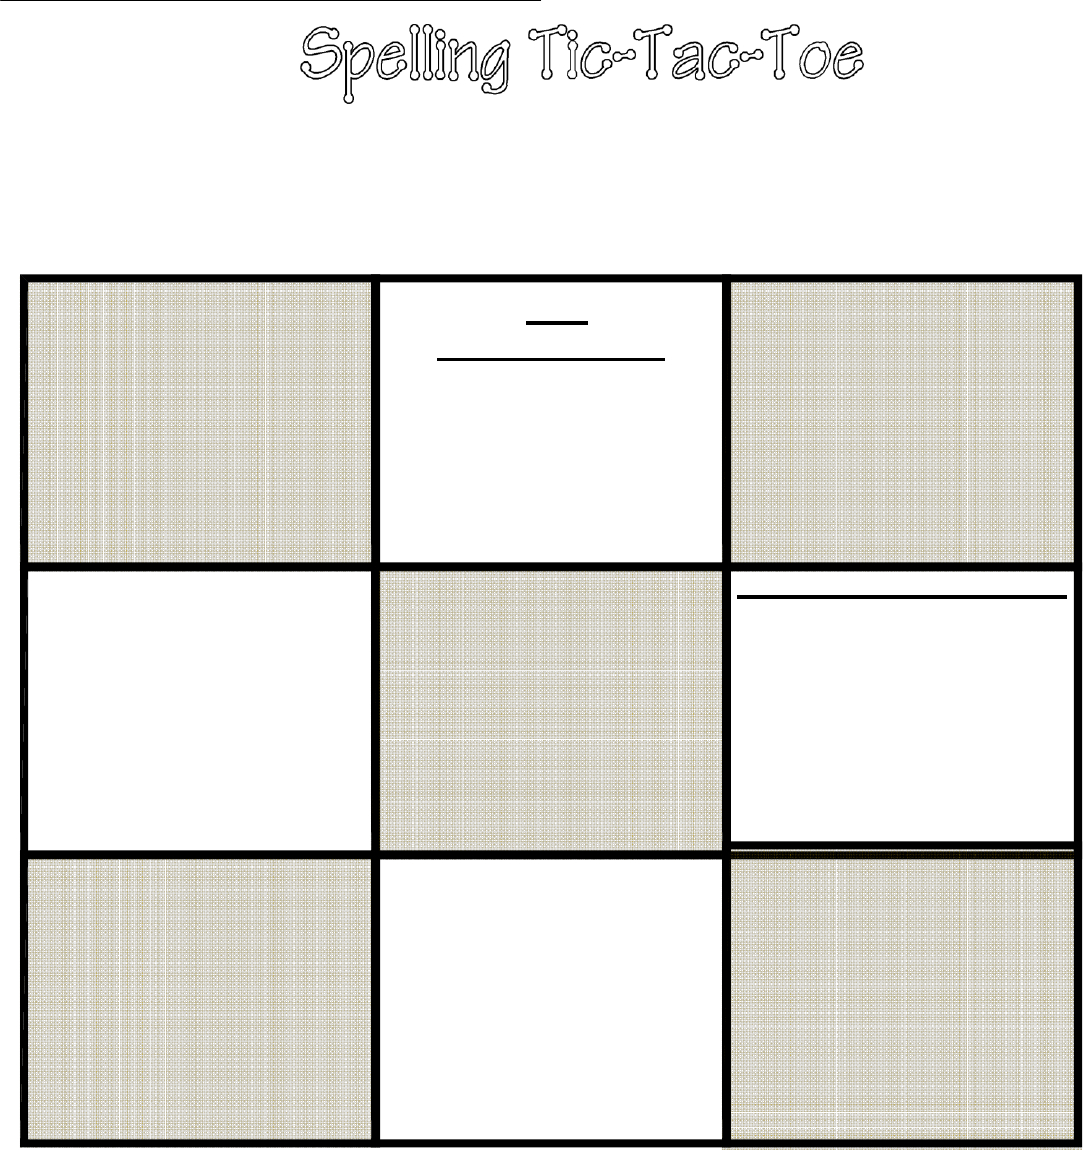 67A Tic Tac Toe Template | Wiring Library Pertaining To Tic Tac Toe Template Word